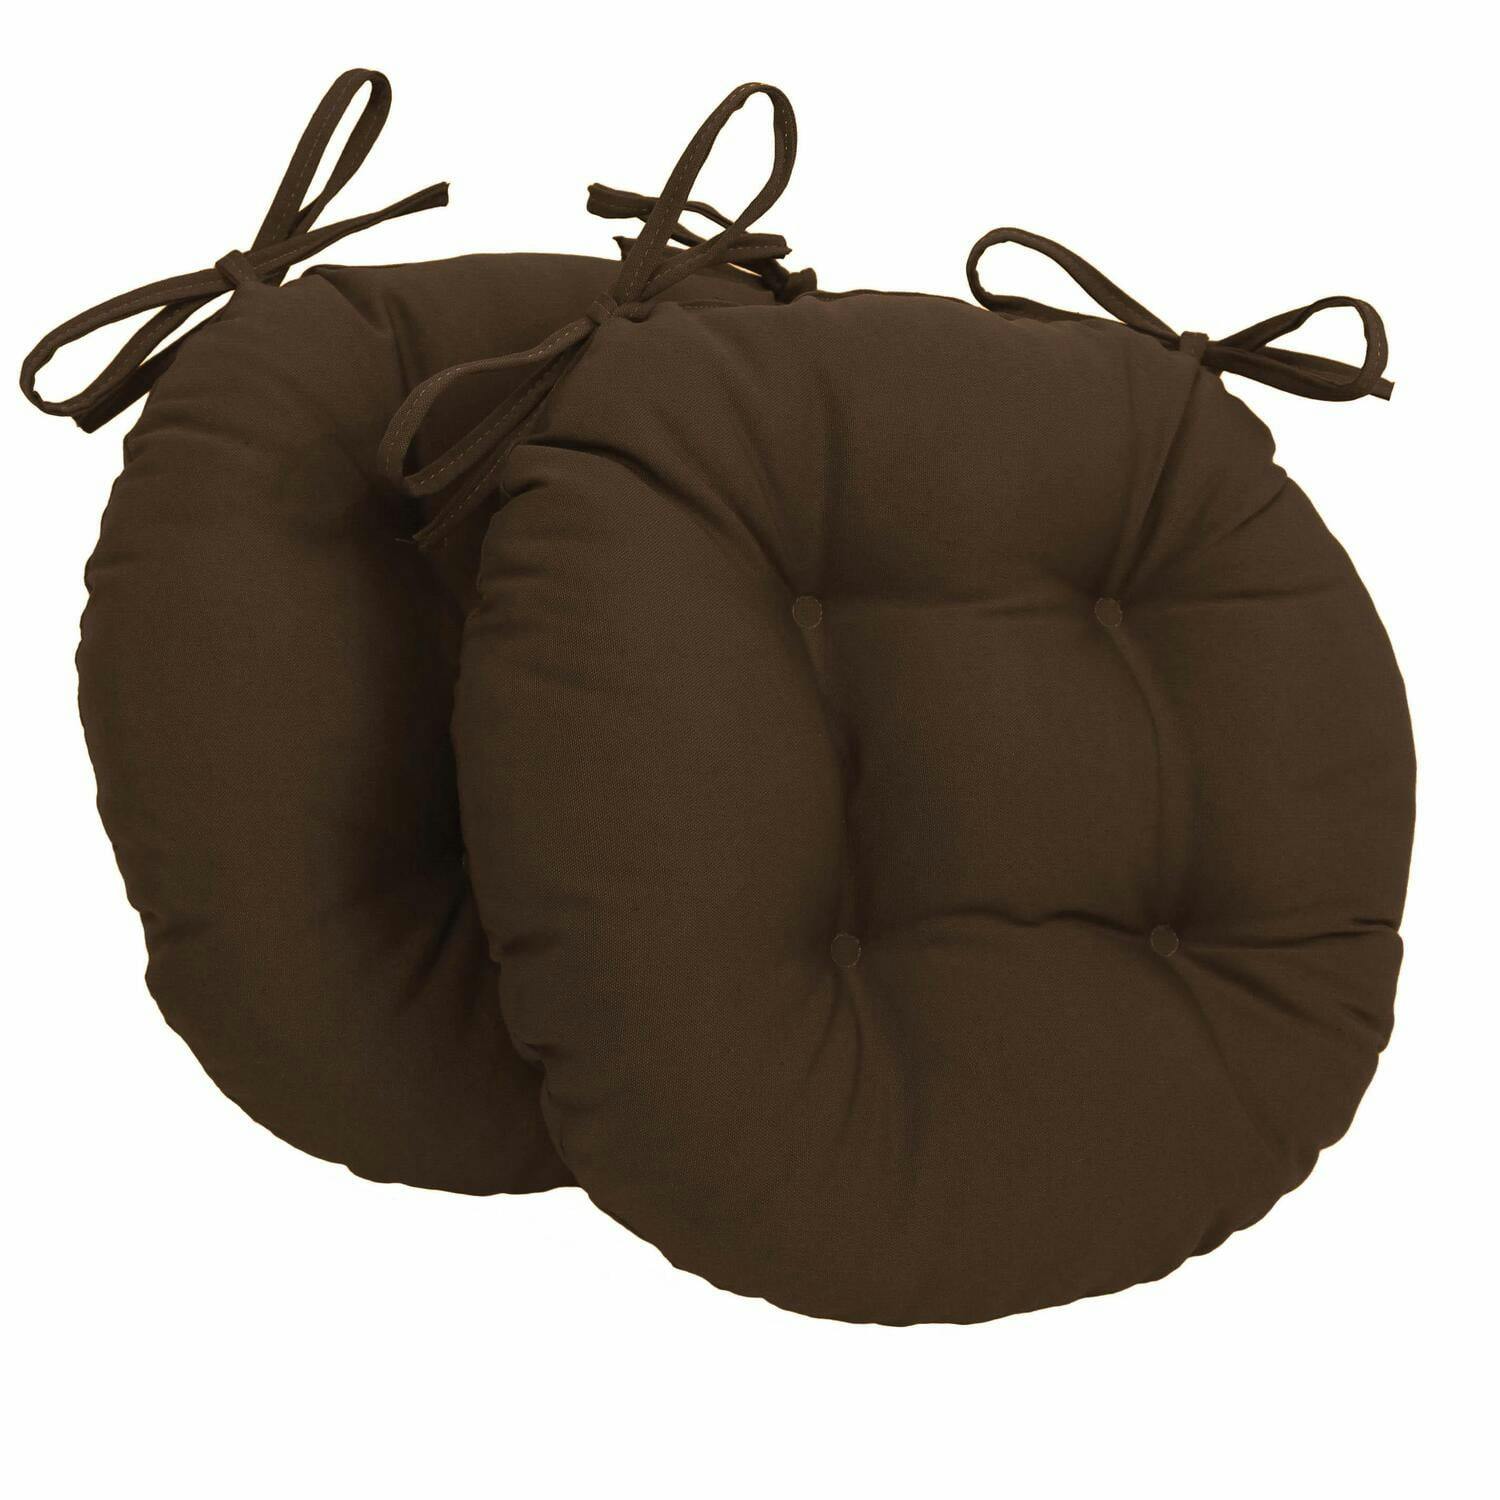 Plush Chocolate Polyester 16" Round Indoor Chair Cushions, Set of 2